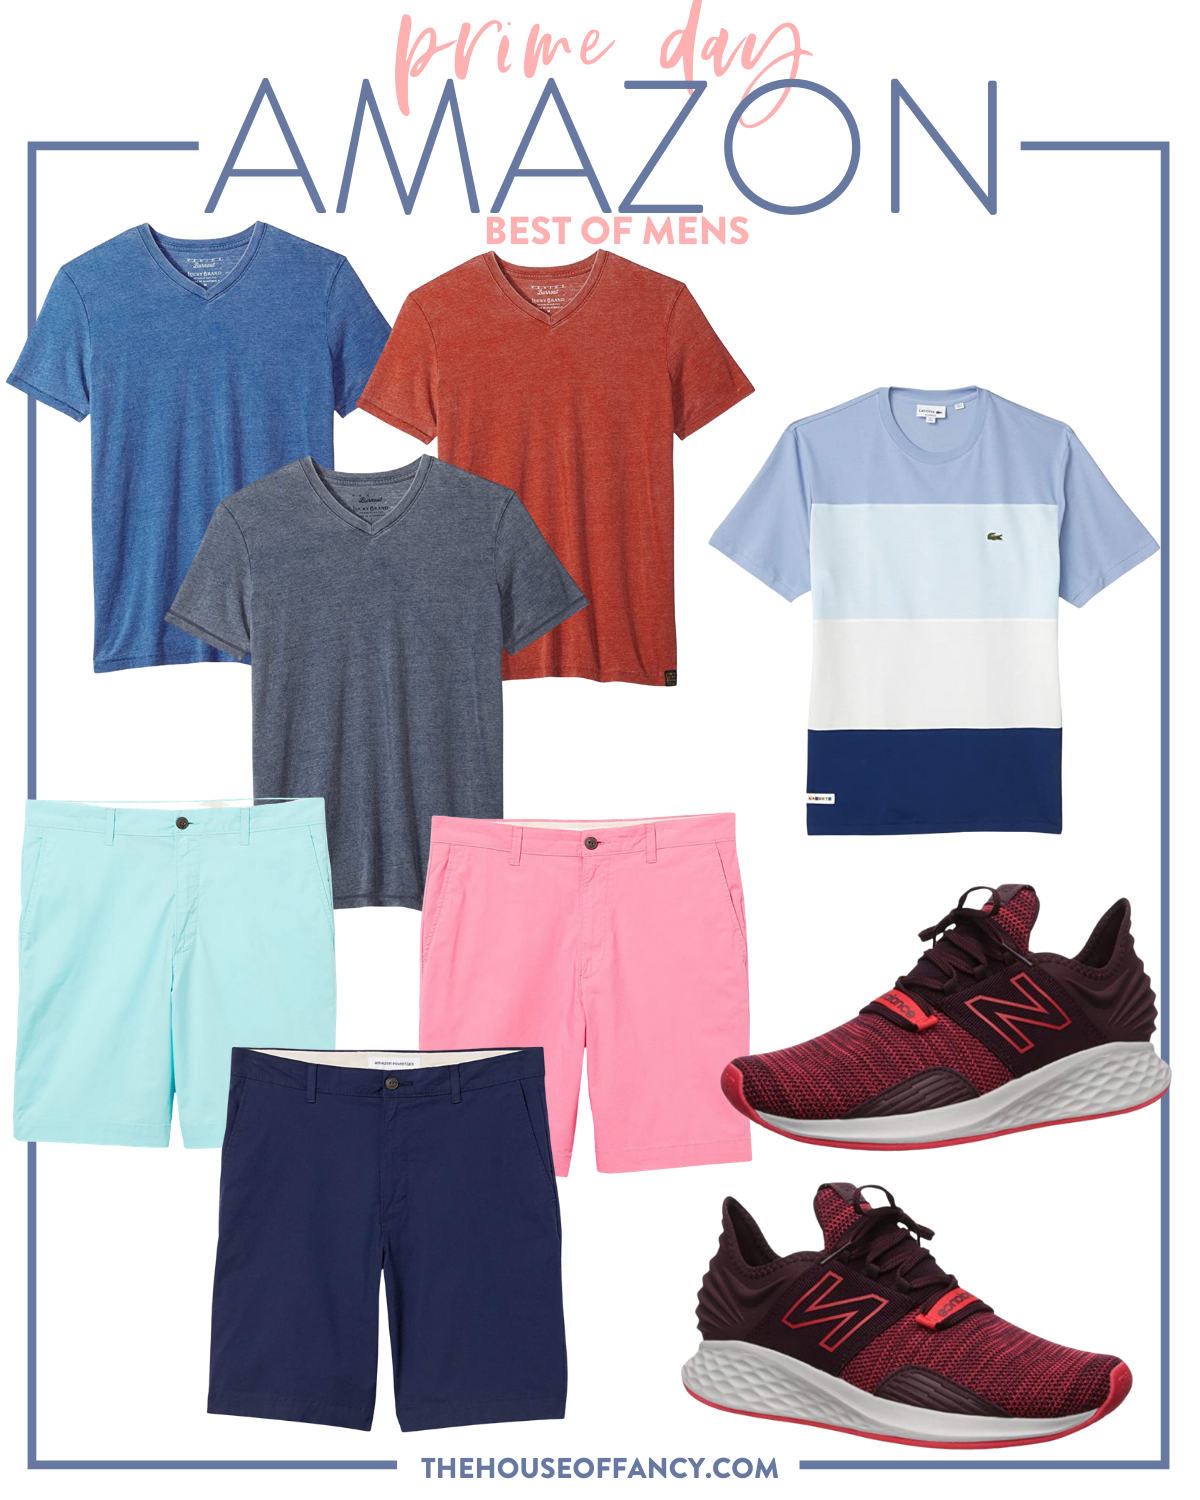 Amazon Prime Day by popular Houston life and style blog, The House of Fancy: collage image of men's v-neck t-shirts, light blue shorts, navy blue shorts, pink shorts, Nike sneakers, and a blue and white stripe shirt.